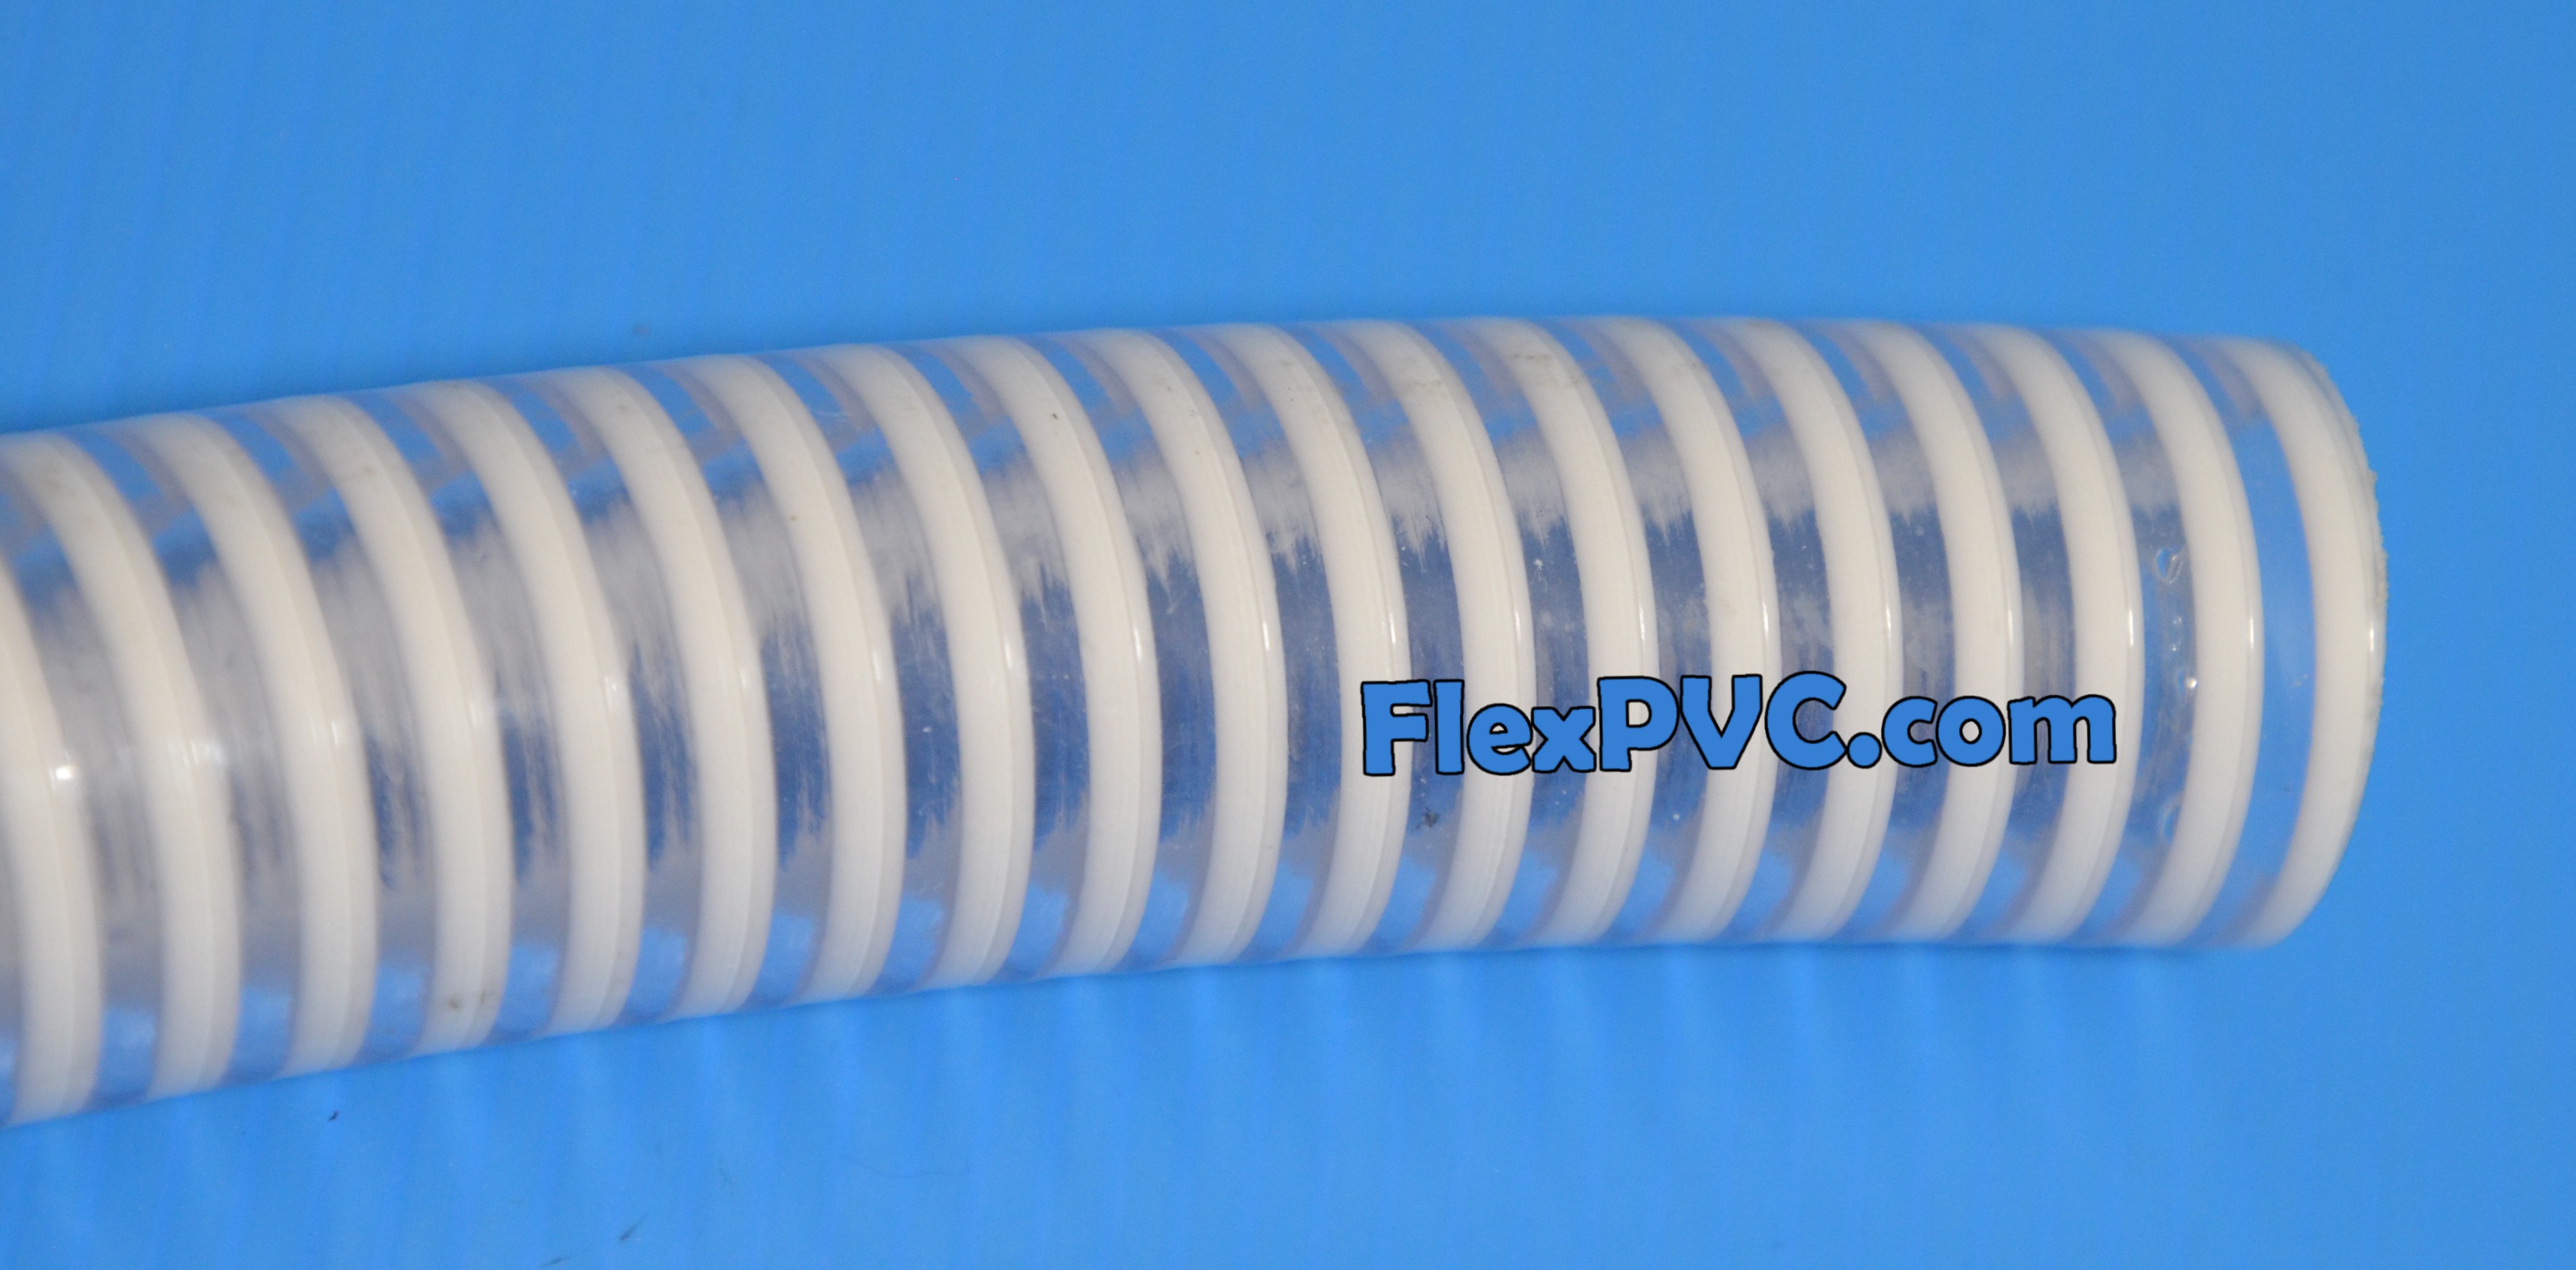 50 Foot 2" Inch ID White PVC Suction Discharge Super Flexible Hose Tubing Smooth 